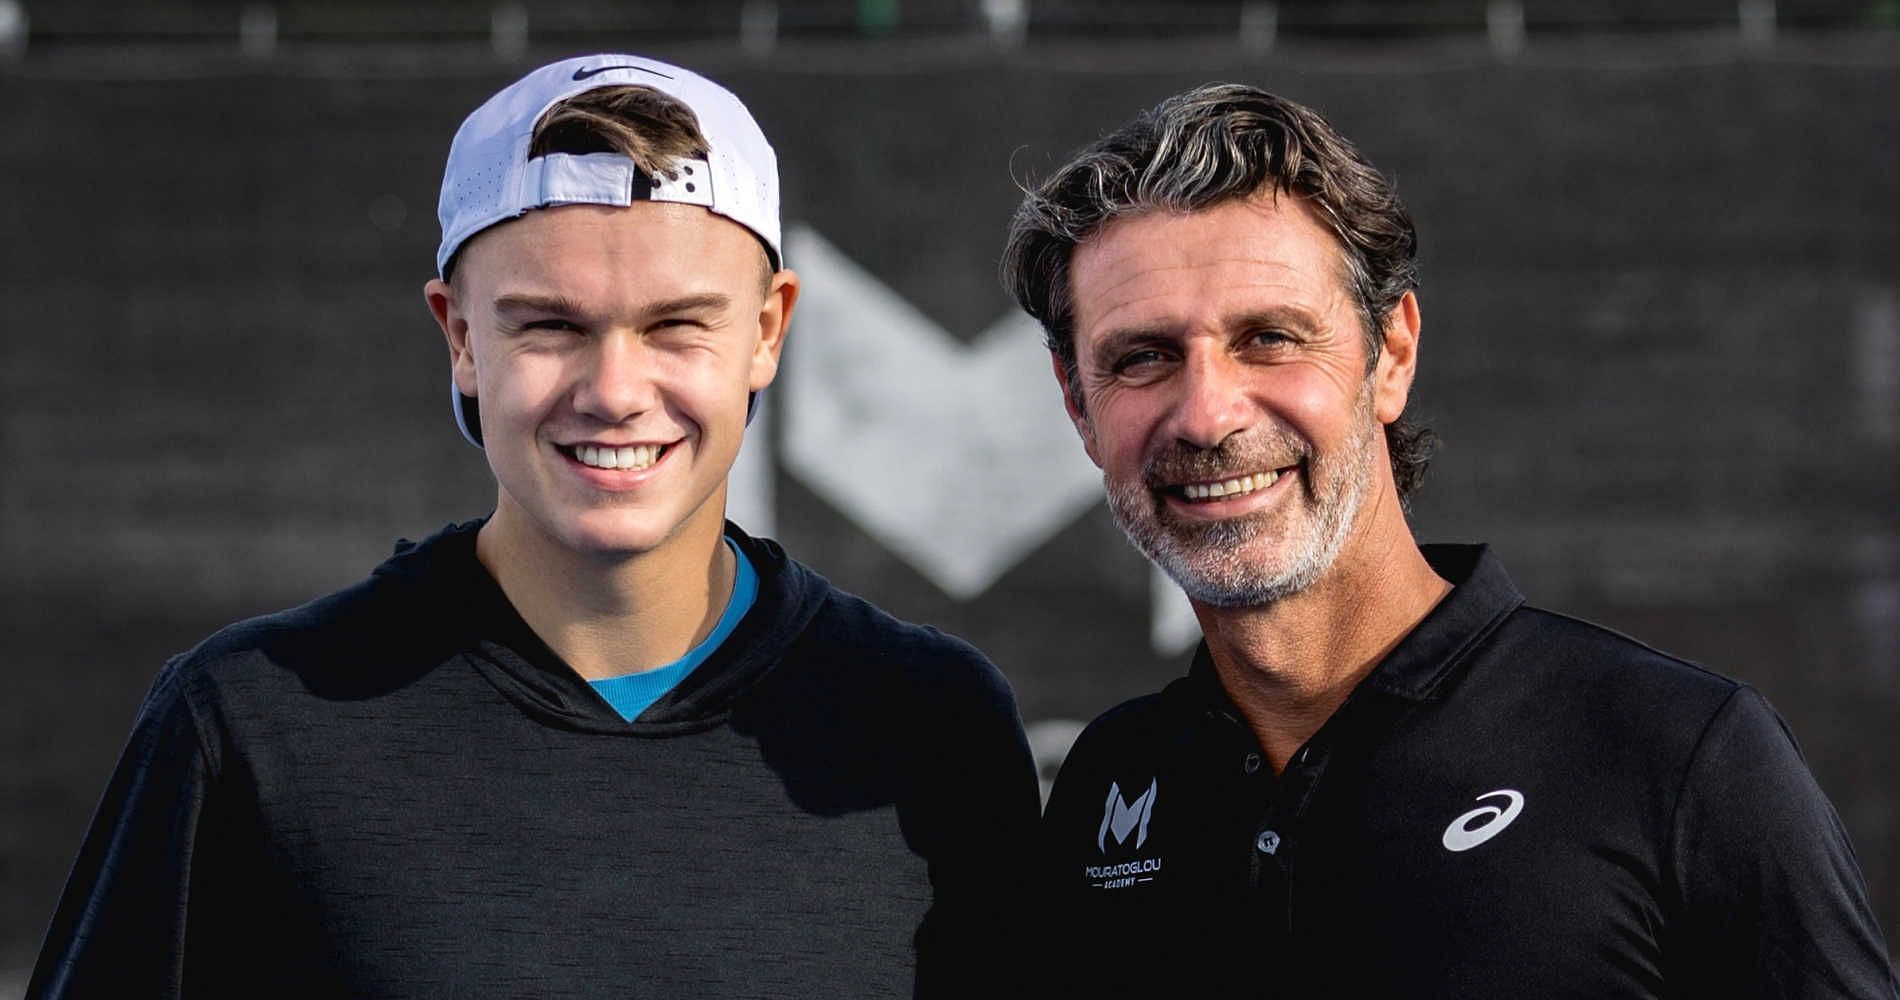 Holger Rune poses with Patrick Mouratoglou